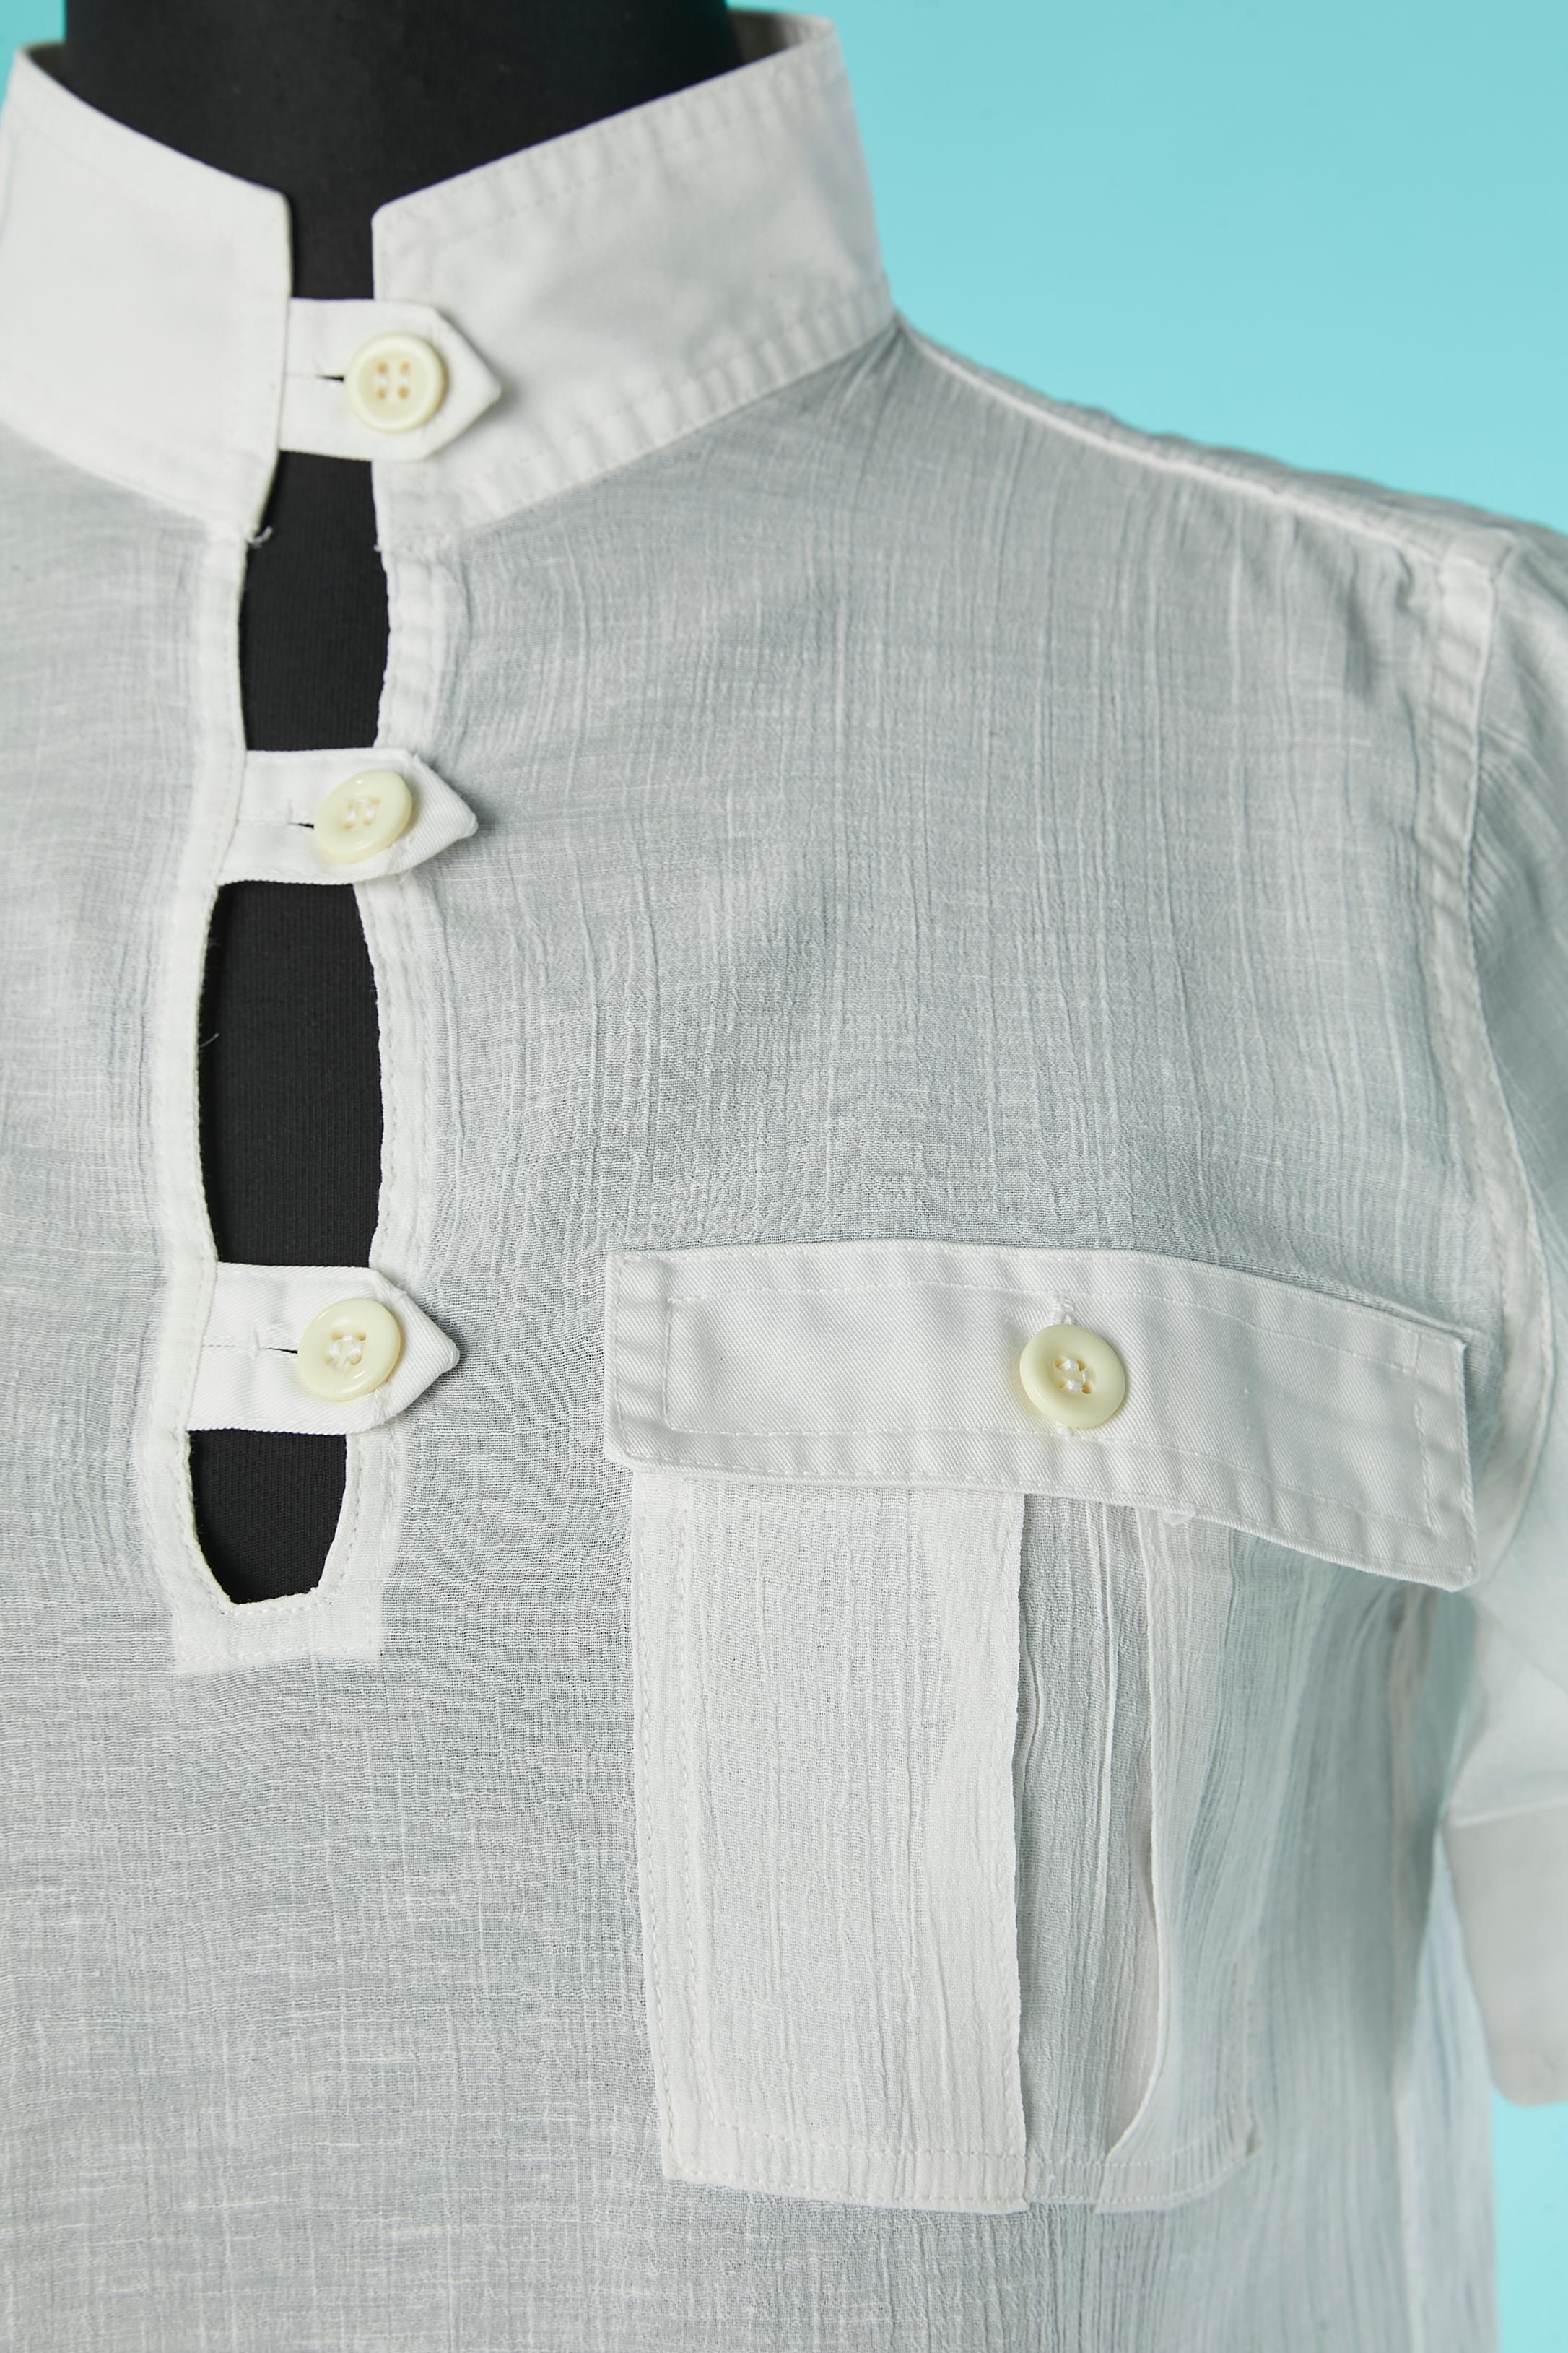 White cotton shirt with short sleeve .Button & buttonhole in the front, pockets and back. 
Box-pleat in the middle back. 2 differents type of cotton between the pockets flap/collar/sleeve edge and the main fabric
SIZE 